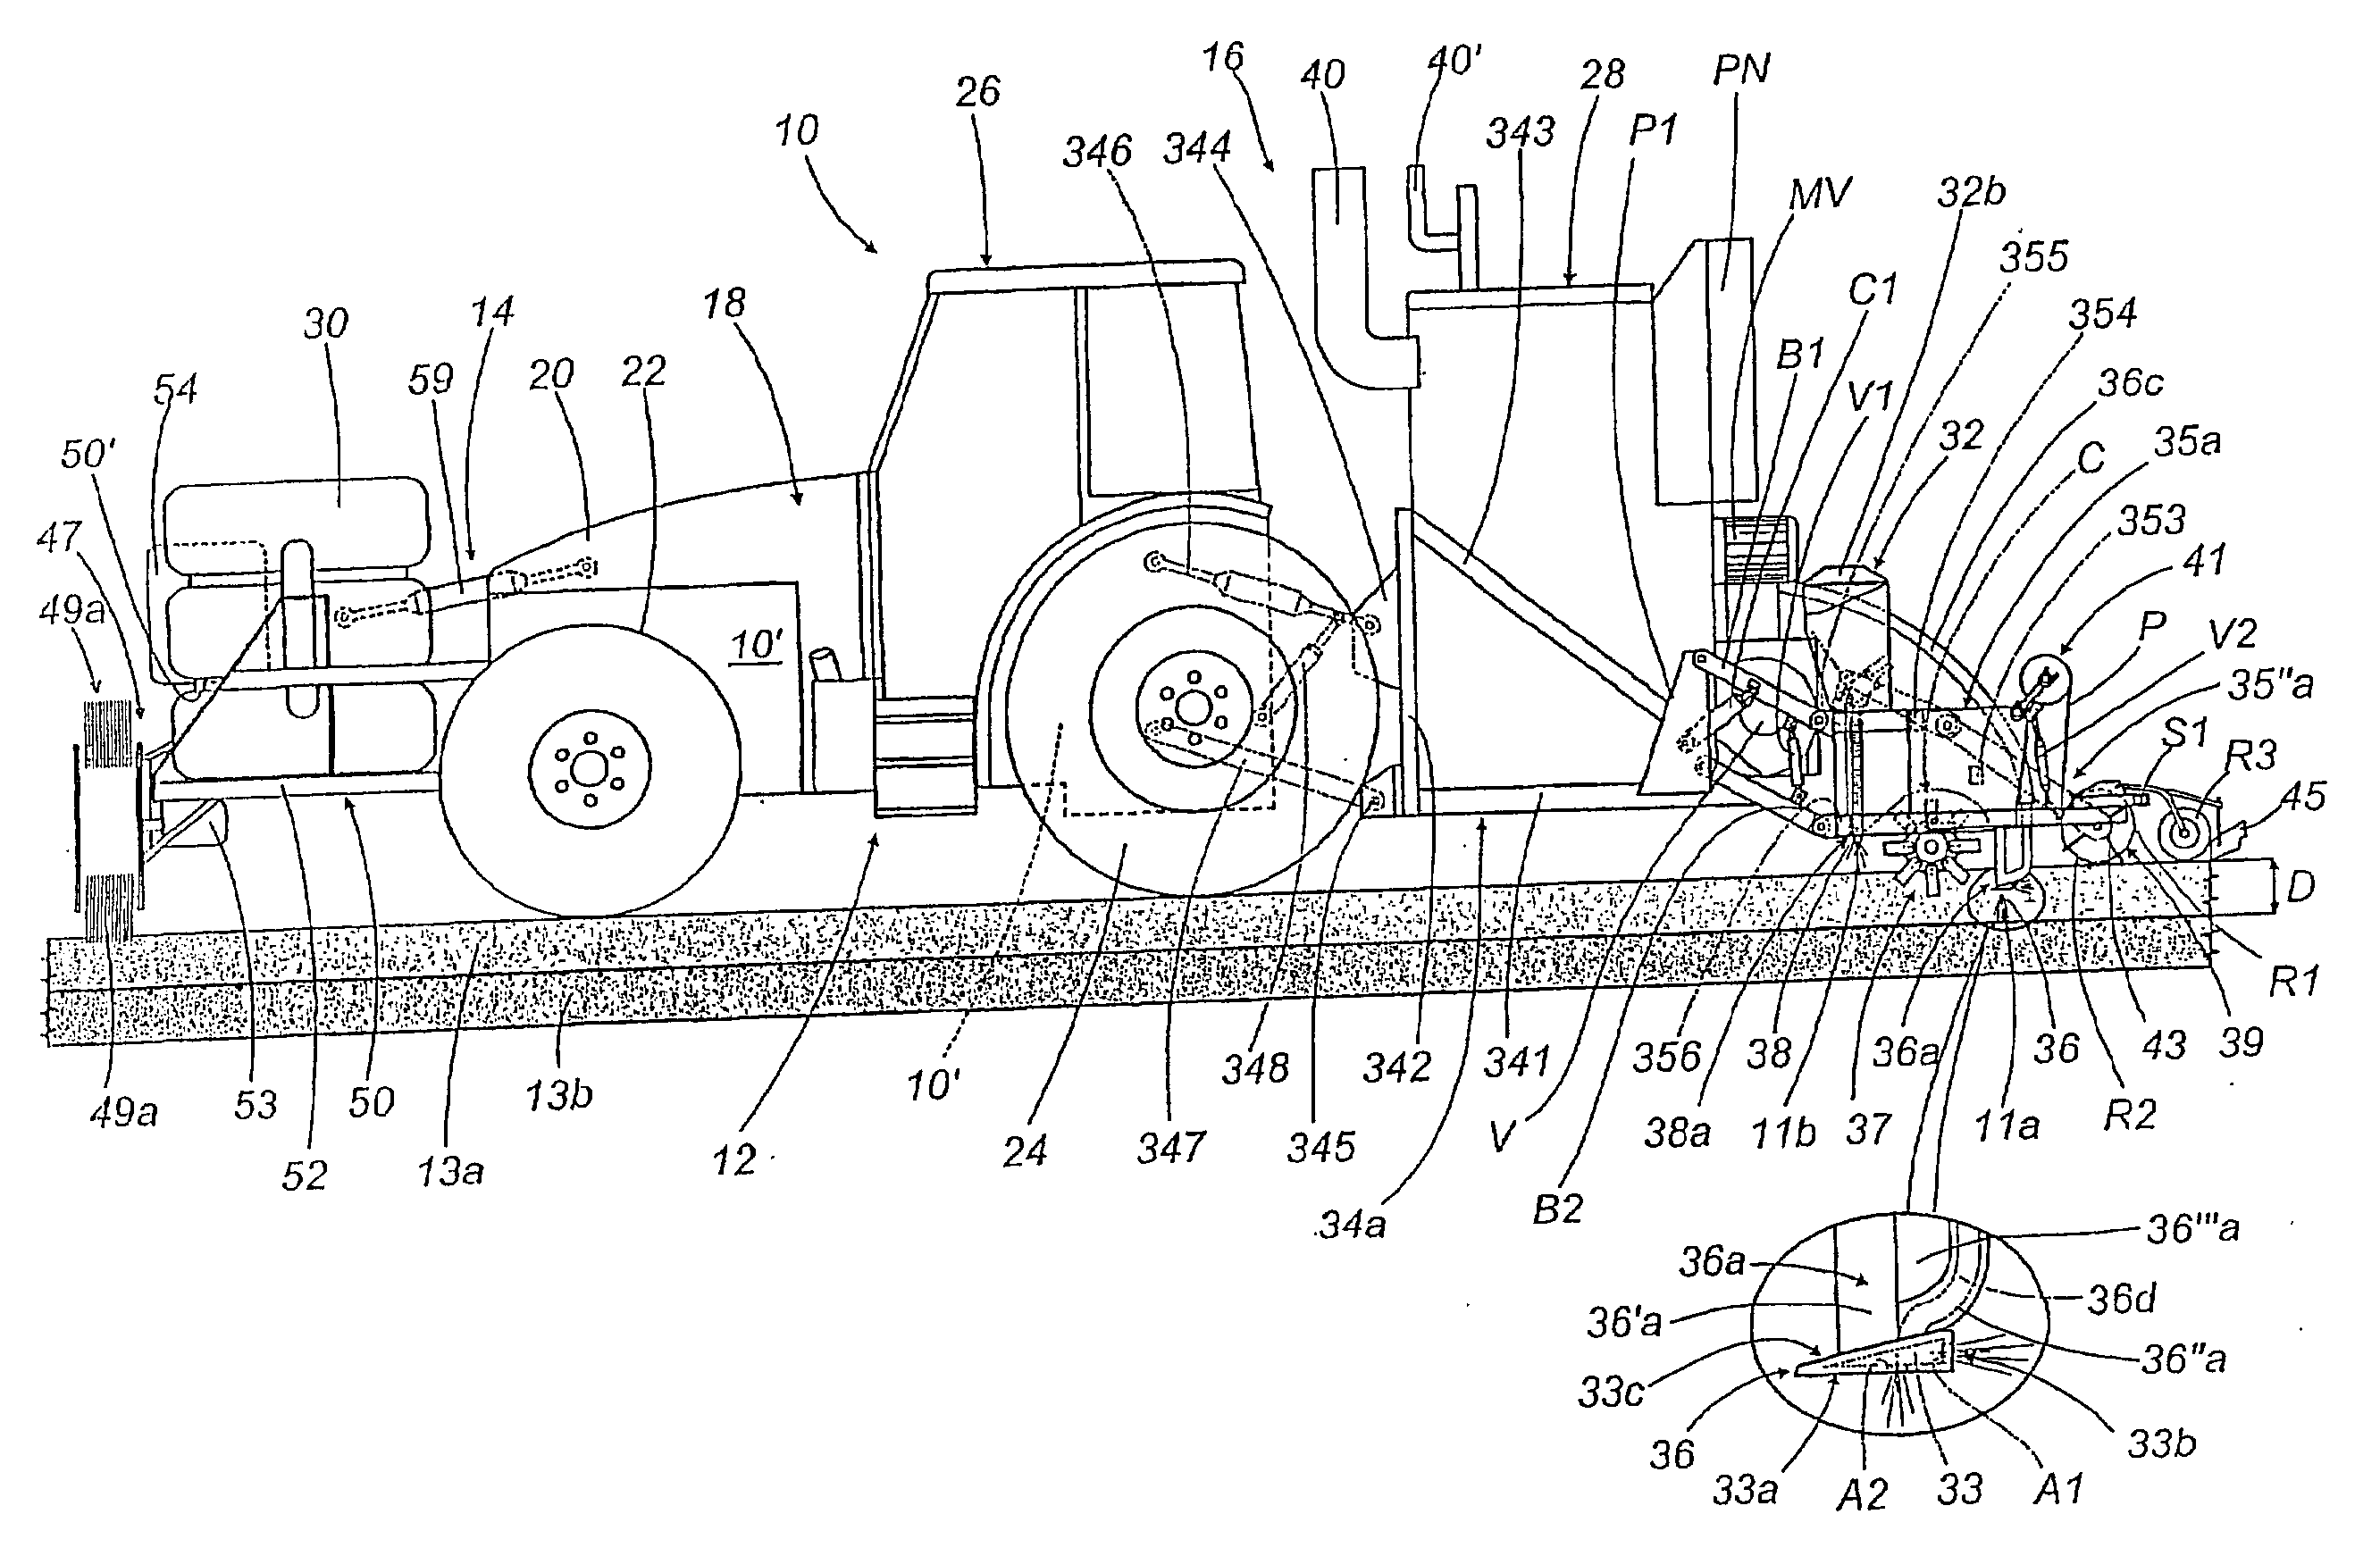 Apparatuses and methods for sterilizing soil